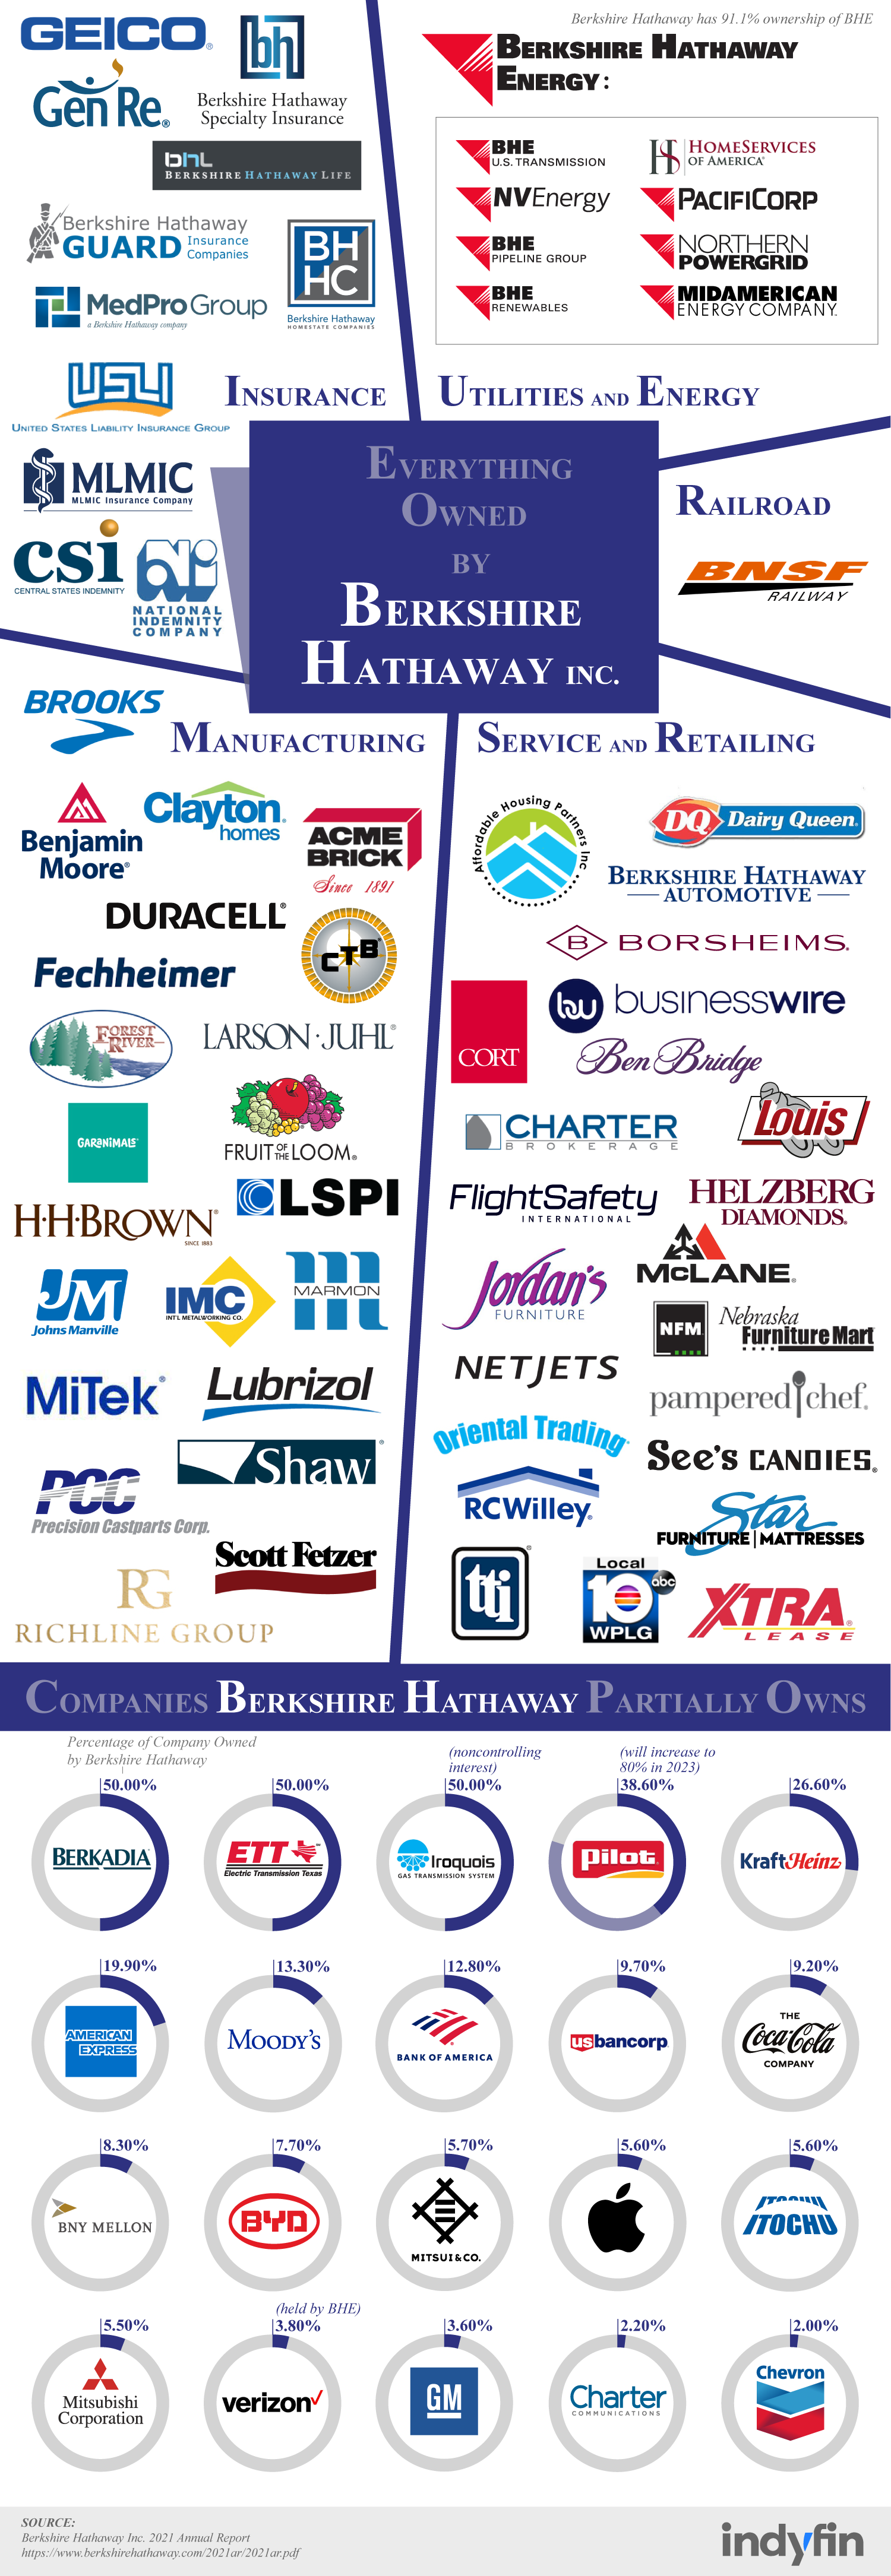 companies-berkshire-hathaway-owns-chartistry